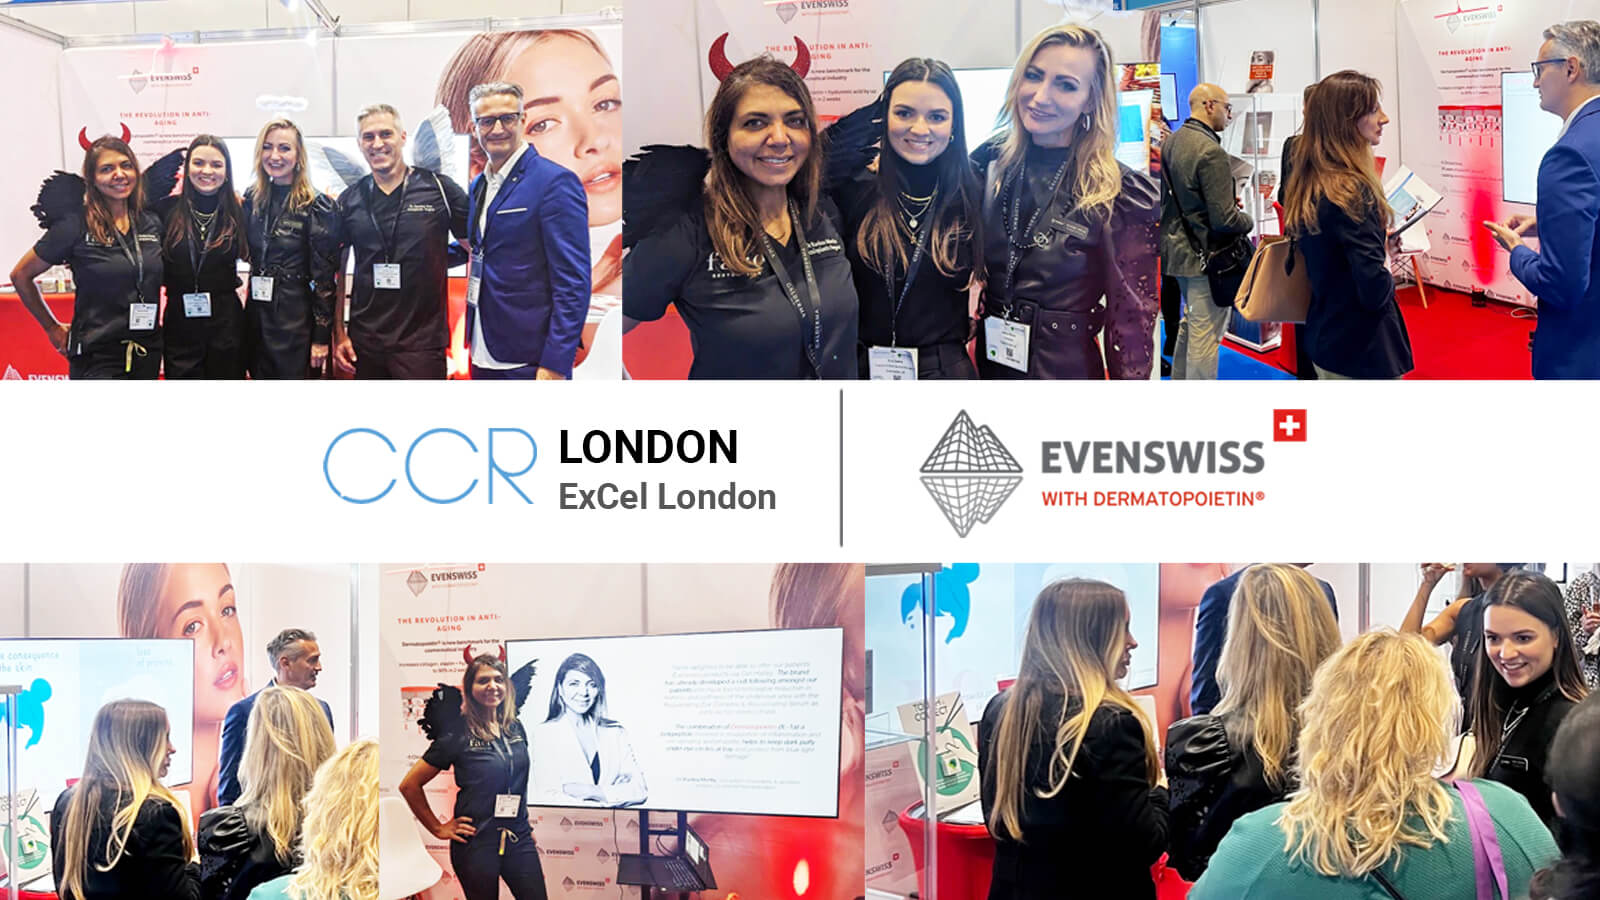 Evenswiss was present last week at CCR London